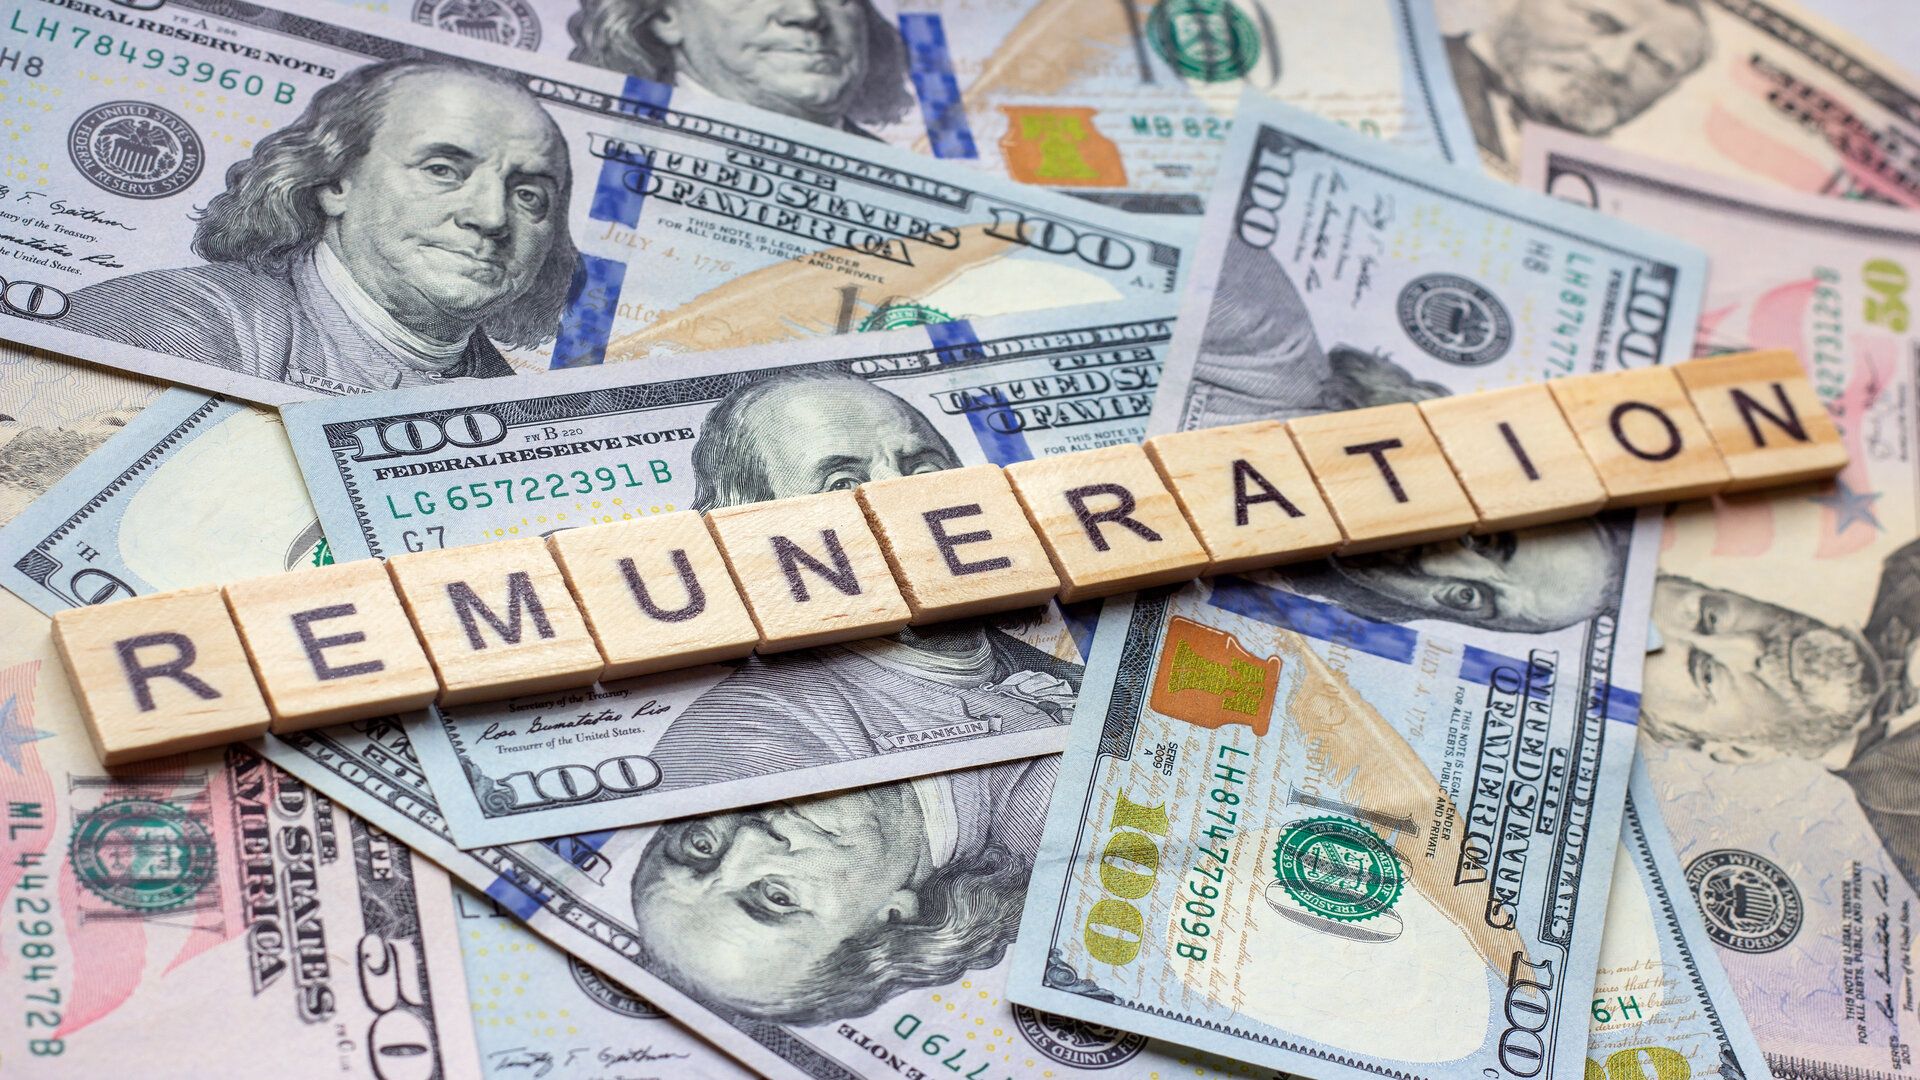 Remuneration - Definition, Meaning, And Types of Remuneration